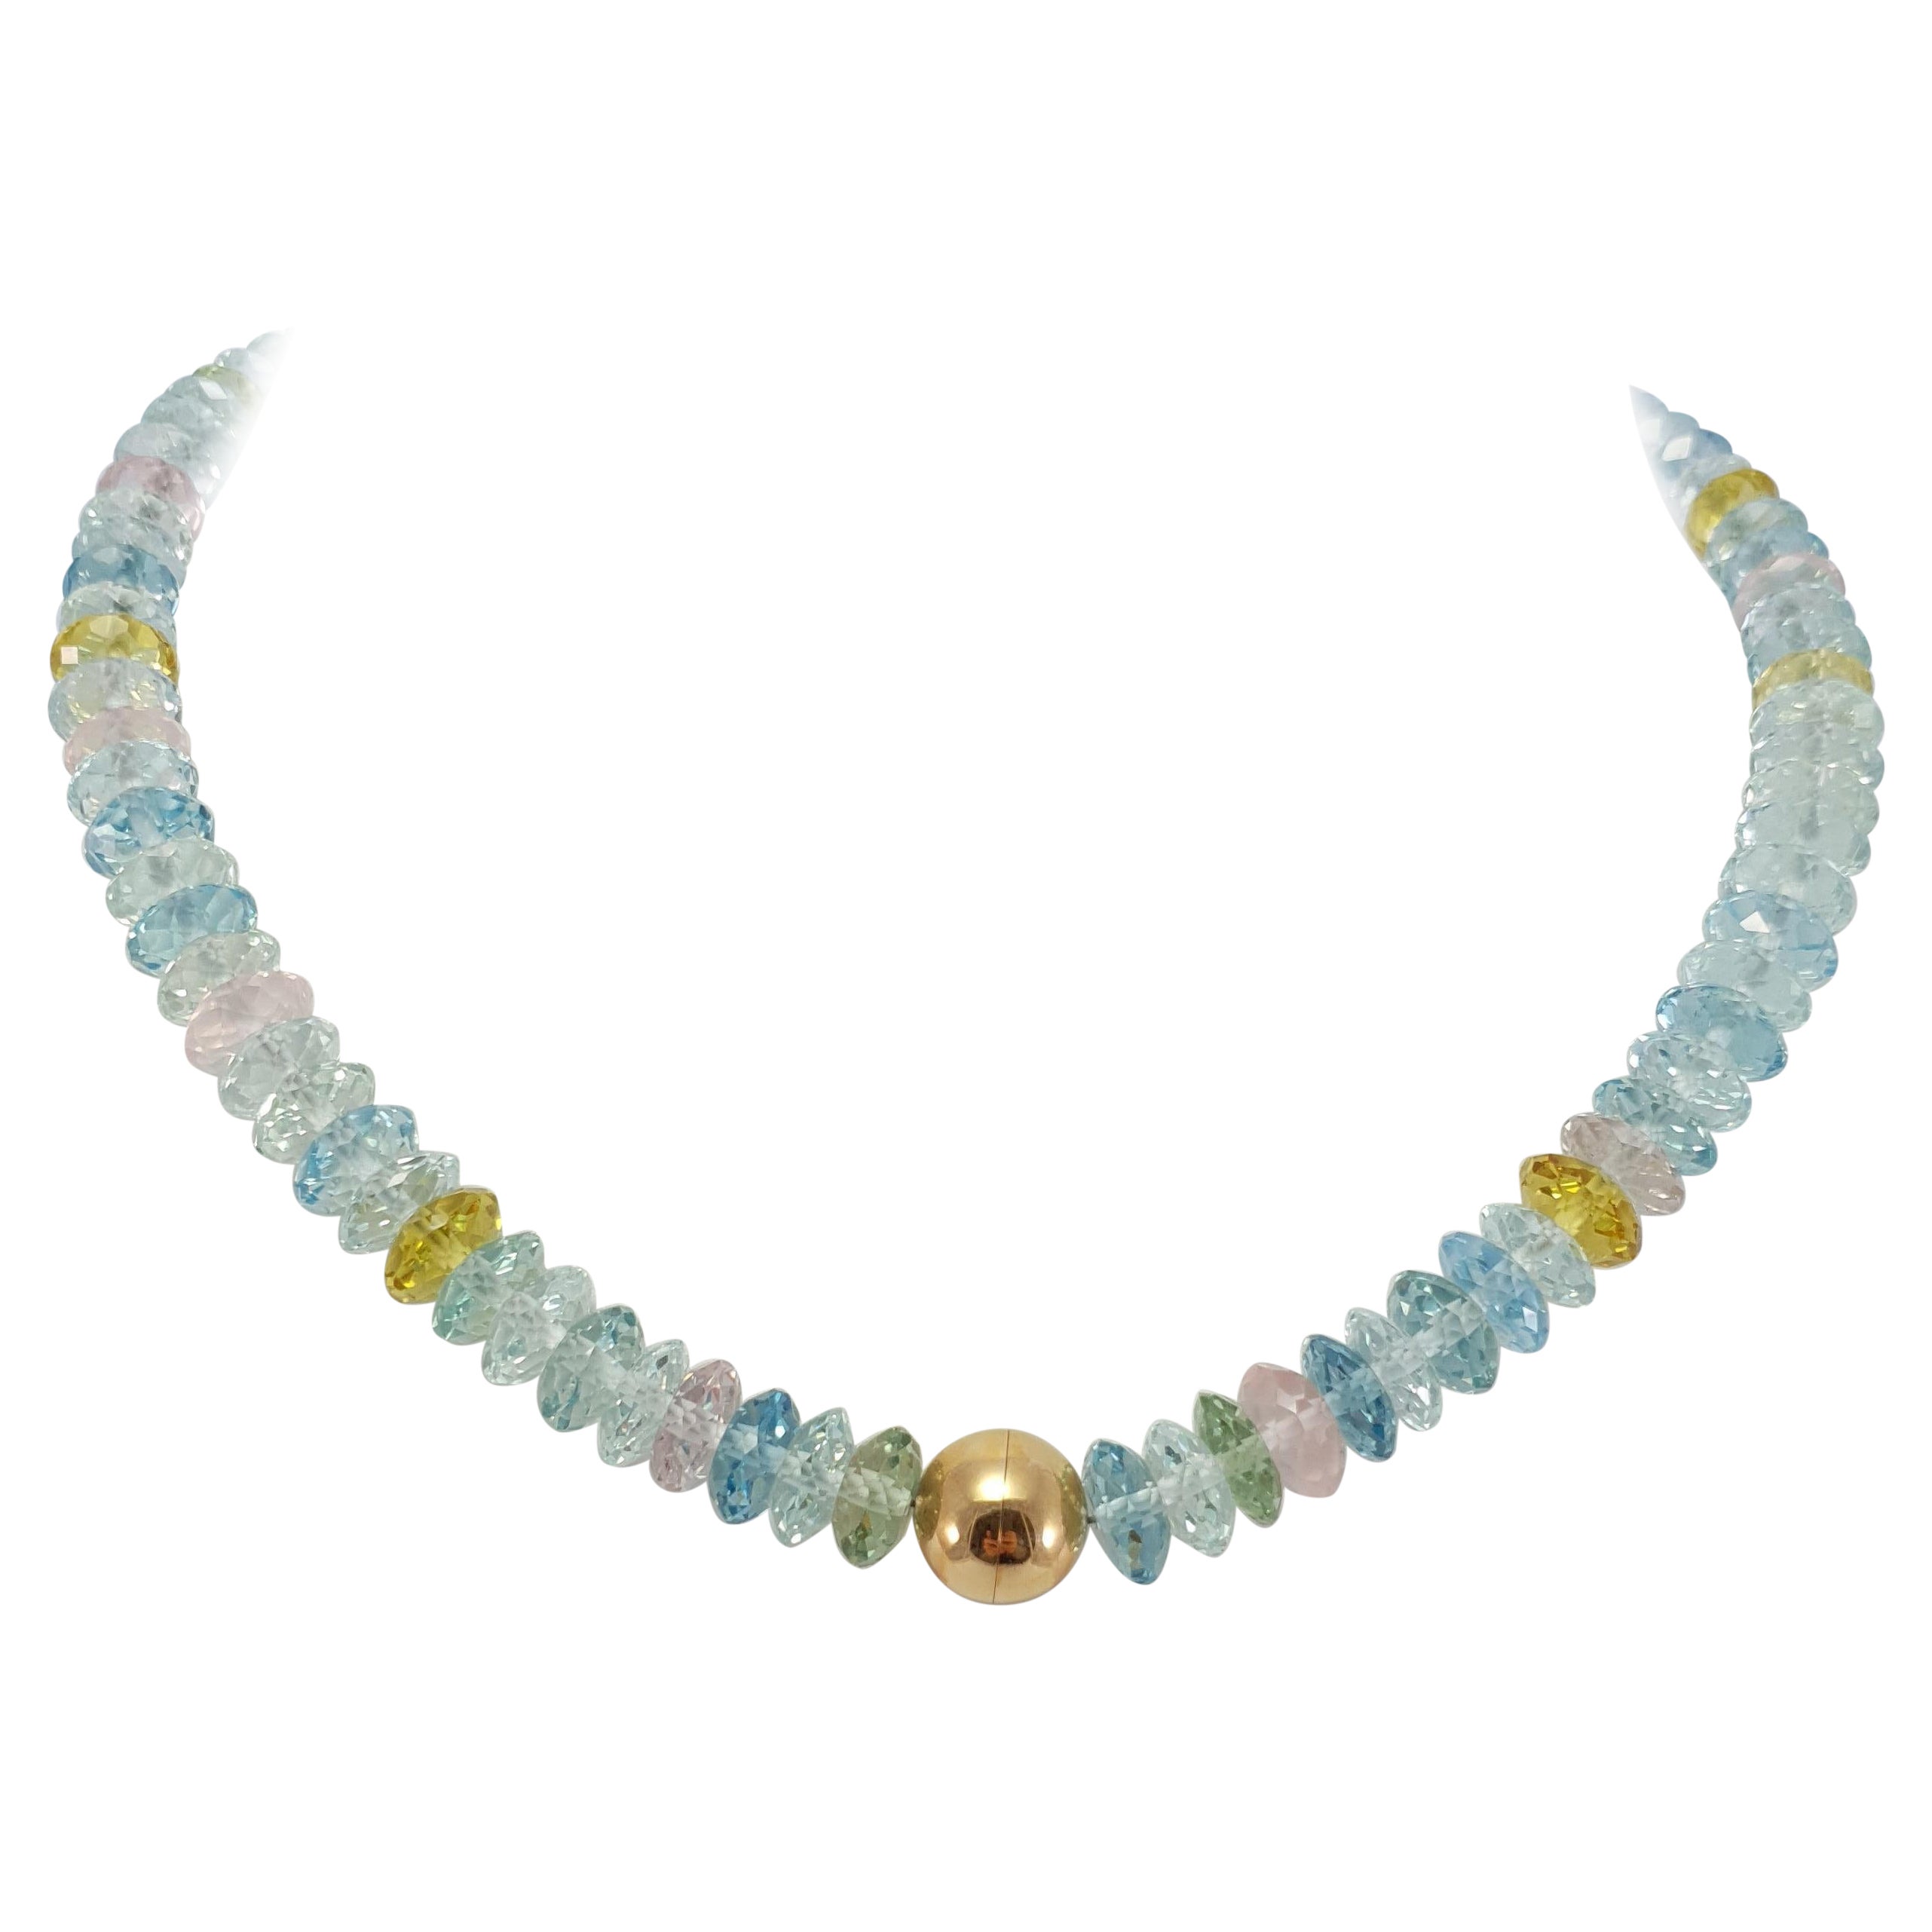 This Natural Faceted Multicolour Beryl Rondel Beaded Necklace with 18 Carat Rose Gold Clasp is totally handmade. Cutting as well as goldwork are made in German quality. The screw clasp is easy to handle and very secure. 
Timeless and classic design